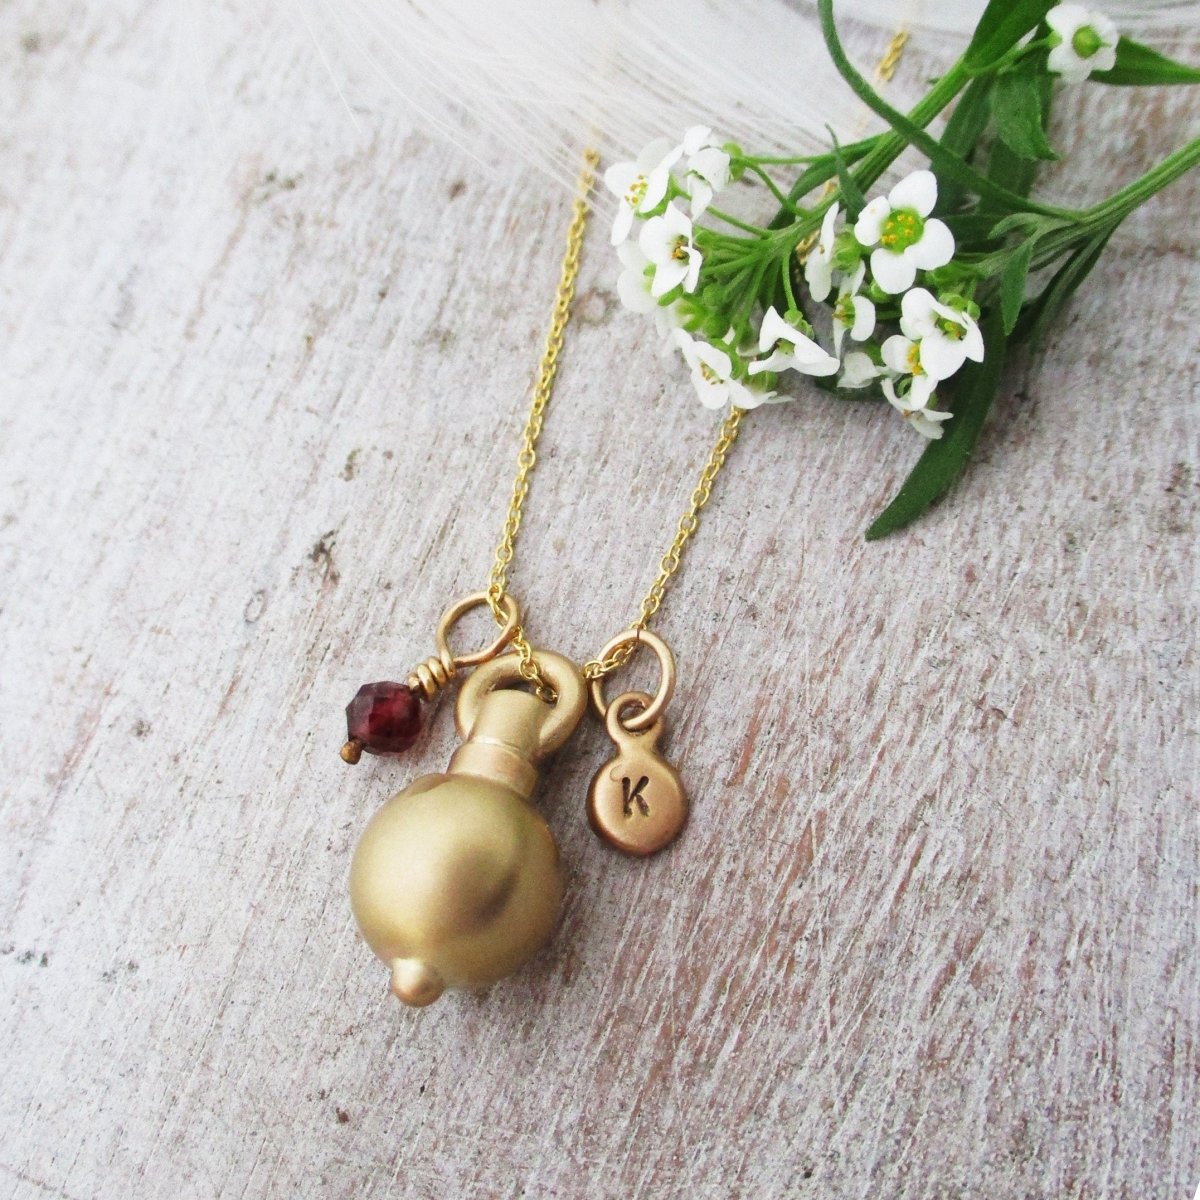 14K Gold 10mm Sphere Pendant for Cremation Ashes, Holds Human or Pet Ashes - Luxe Design Jewellery